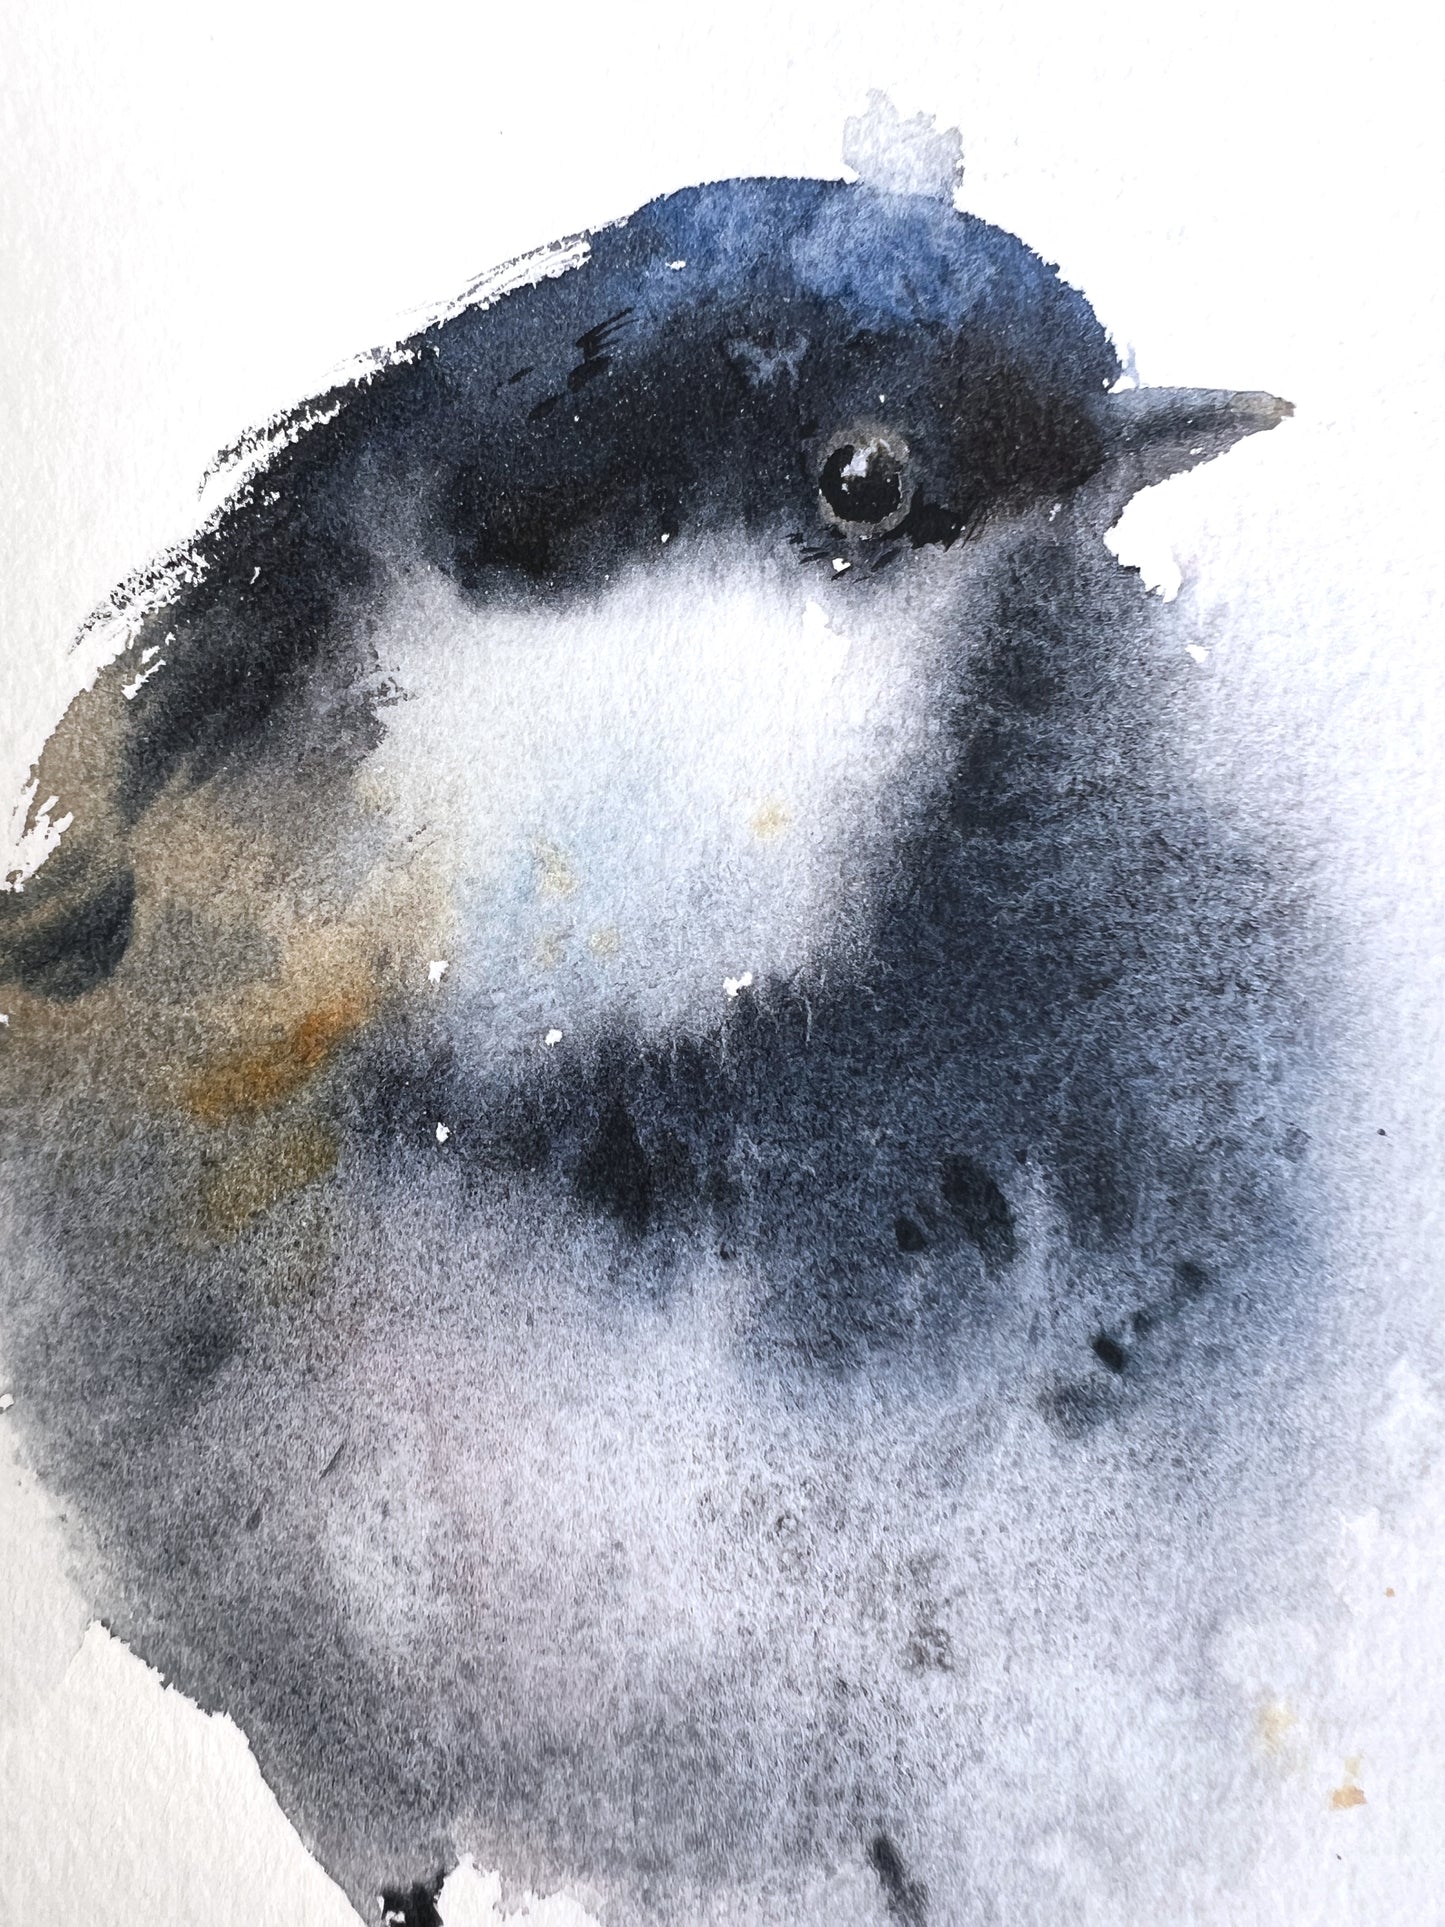 Watercolor Painting of Small Gray Bird, Original Art, Beautiful Wall Accent, Christmas Gift for Nature Enthusiasts